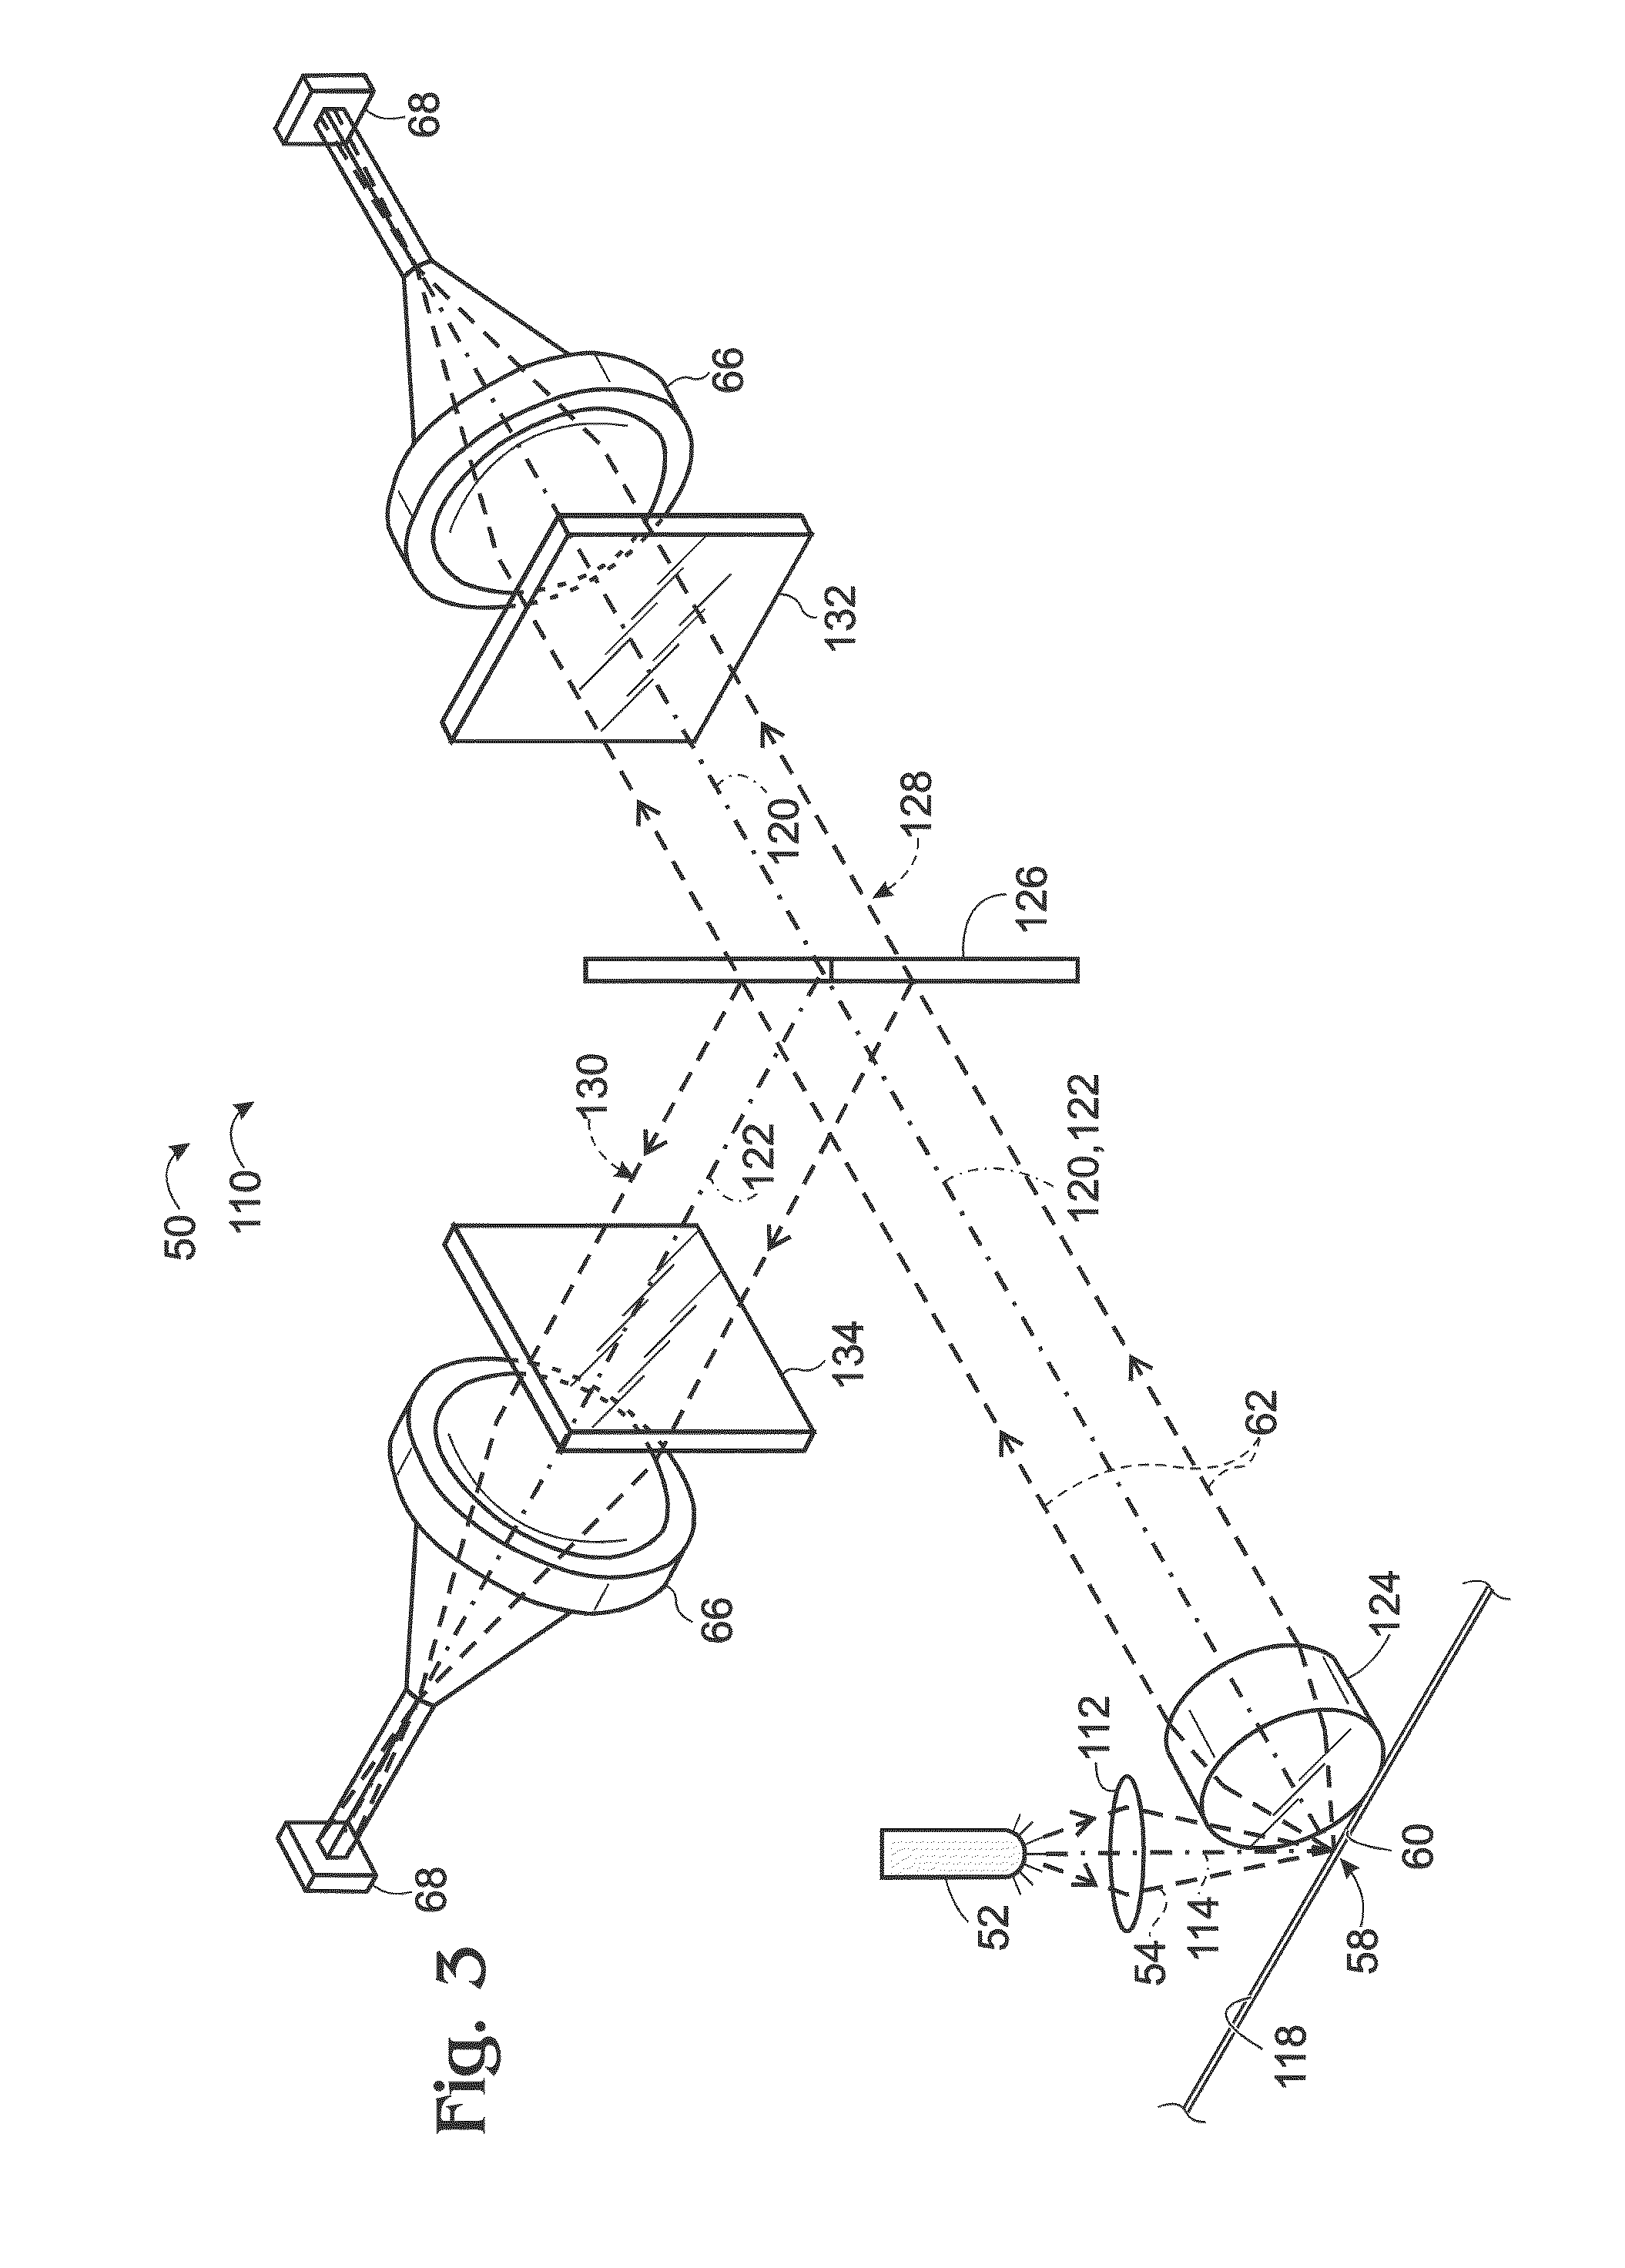 Detection system with one-piece optical element to concentrate and homogenize light